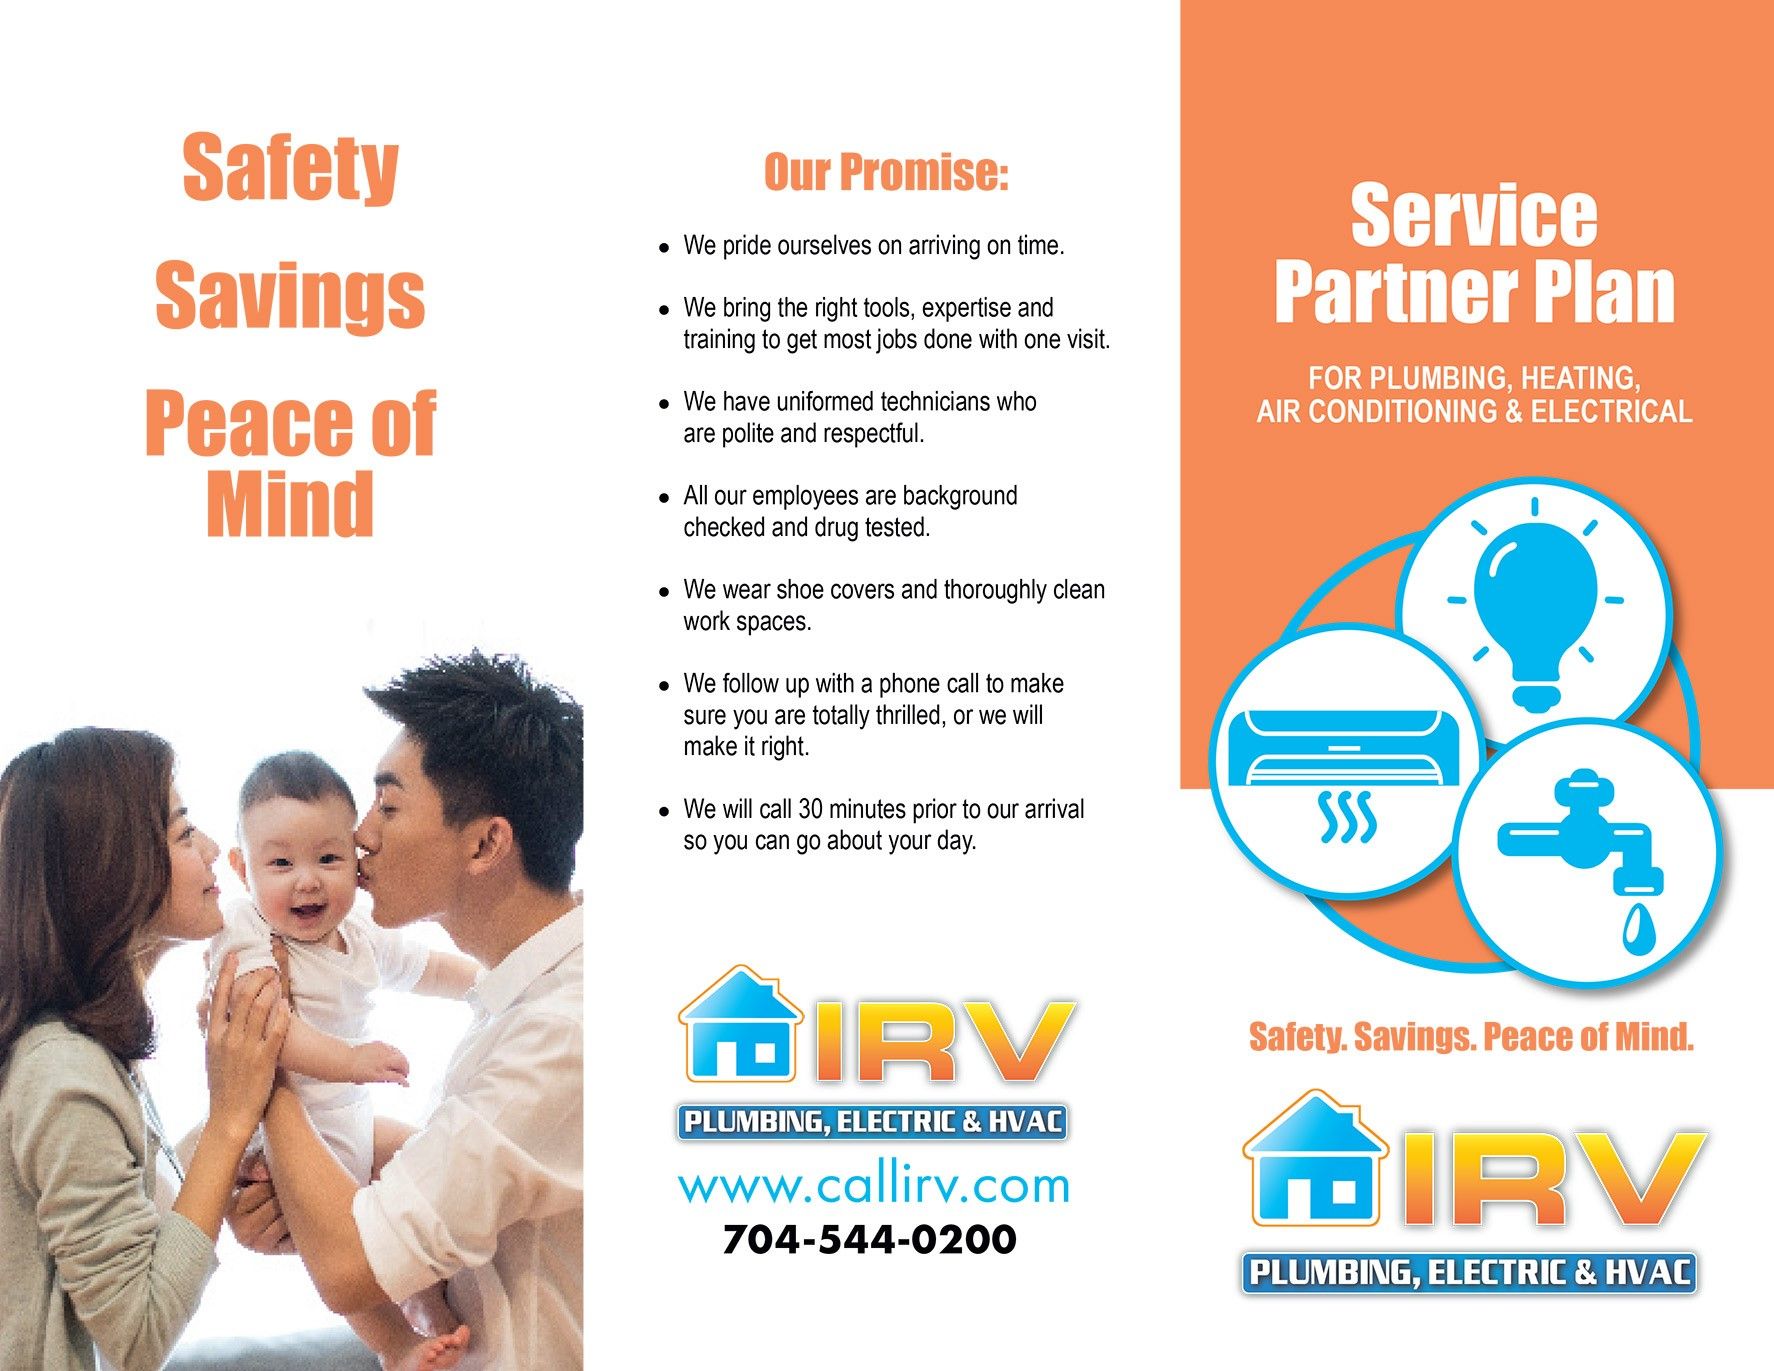 IVR plumbing brochure page 2 residential services